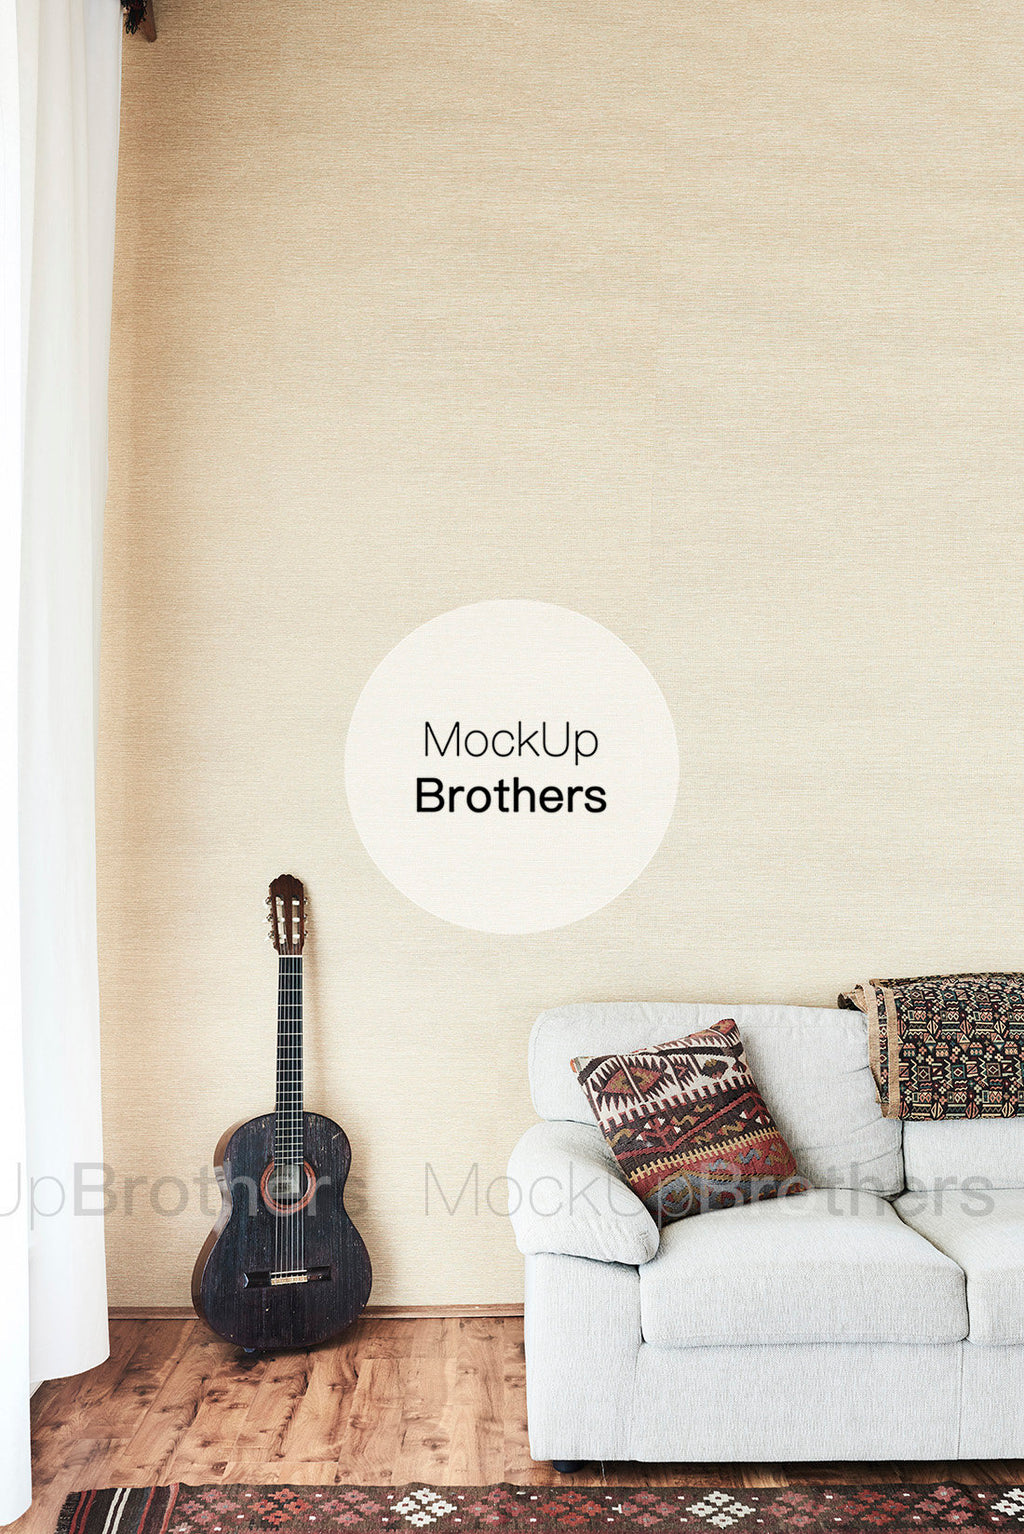 cozy wall art mockup in farmhouse style by Mockup brothers